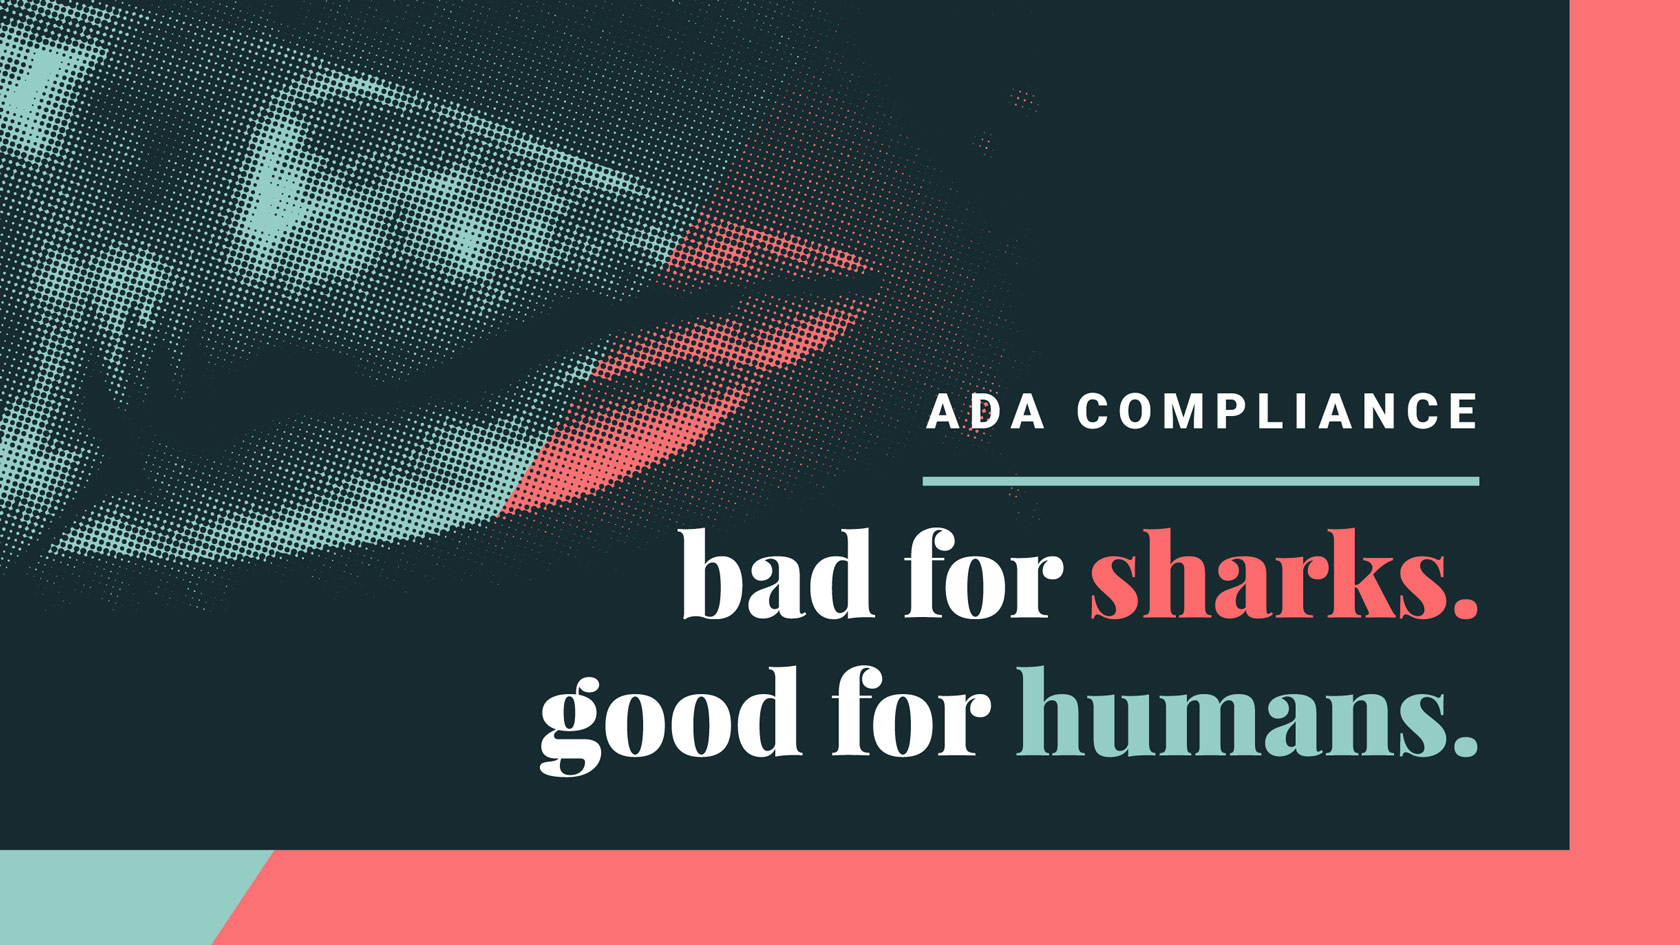 ADA Compliance: bad for sharks, good for humans